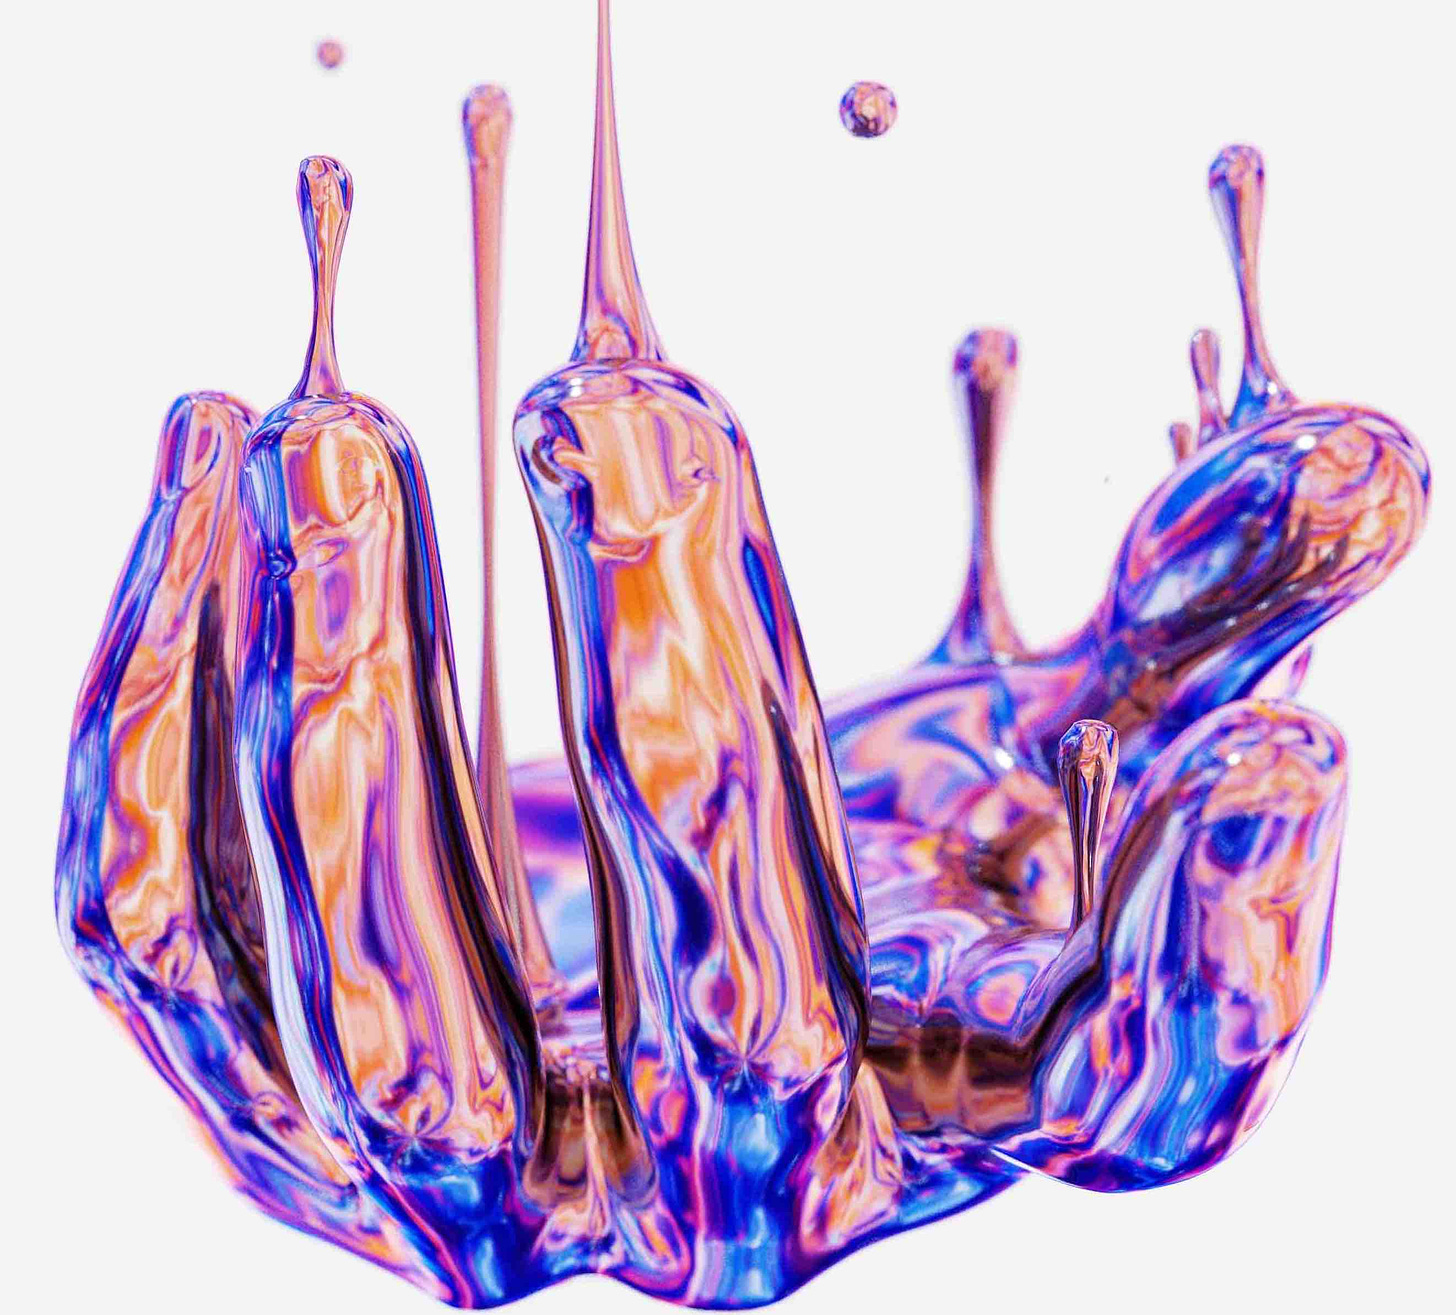 Holographic hand with drips from the palm rising upward to represent how the world is a hologram of our inner world and vibrational frequency